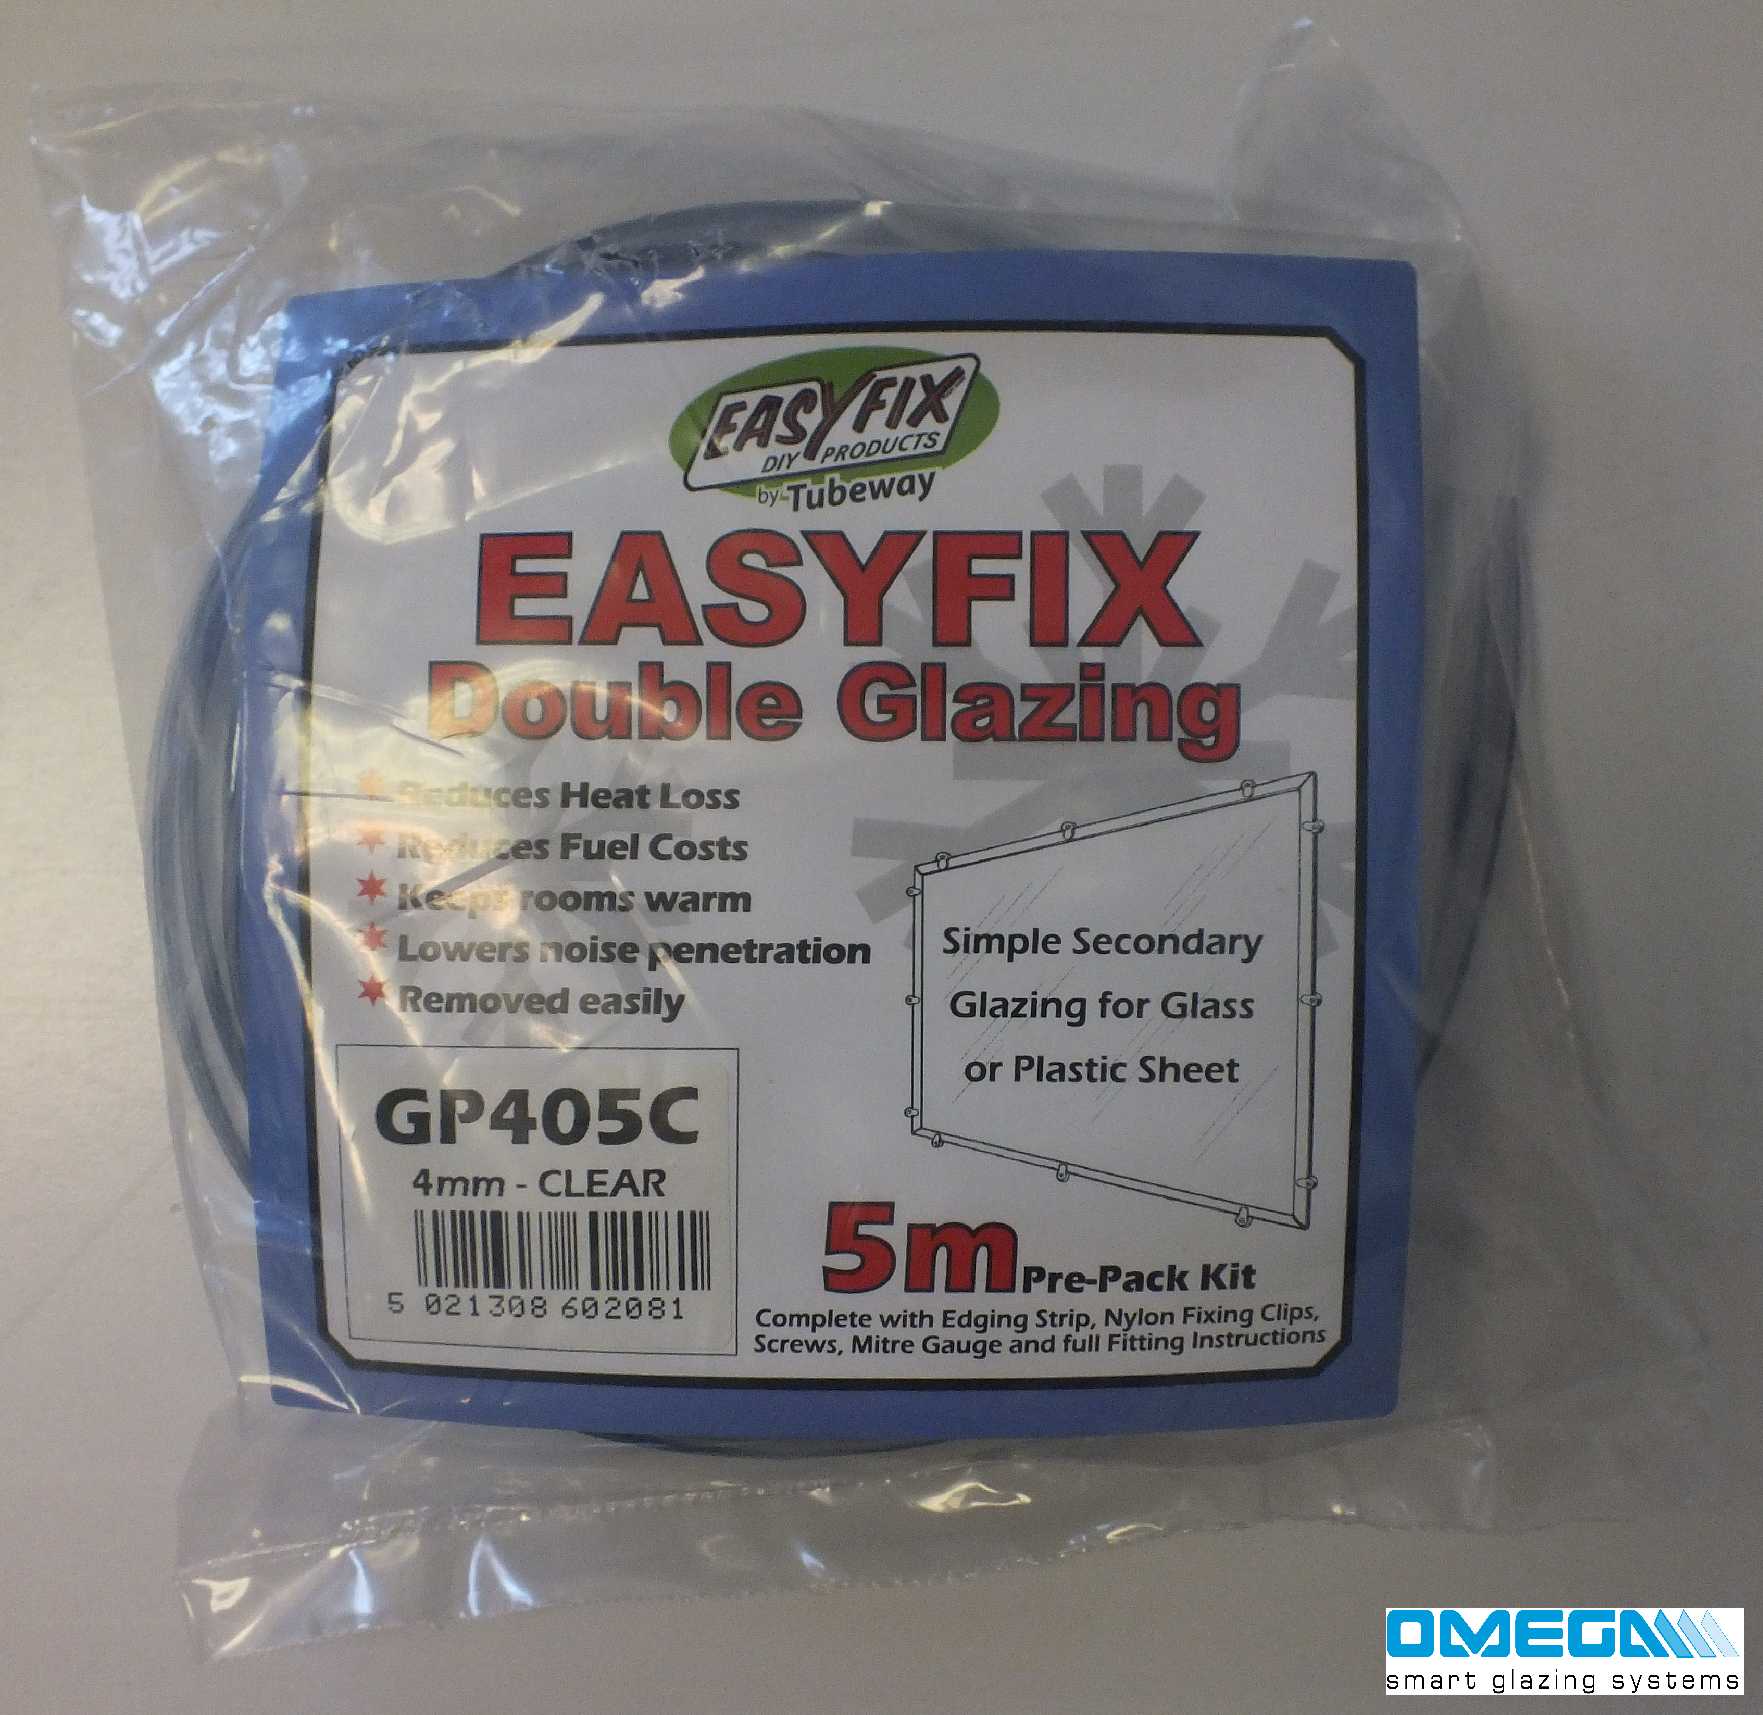 Buy Easyfix Clipglaze Edging Kit - 5m roll of edging for 6mm Glazing Thickness, White or Clear online today